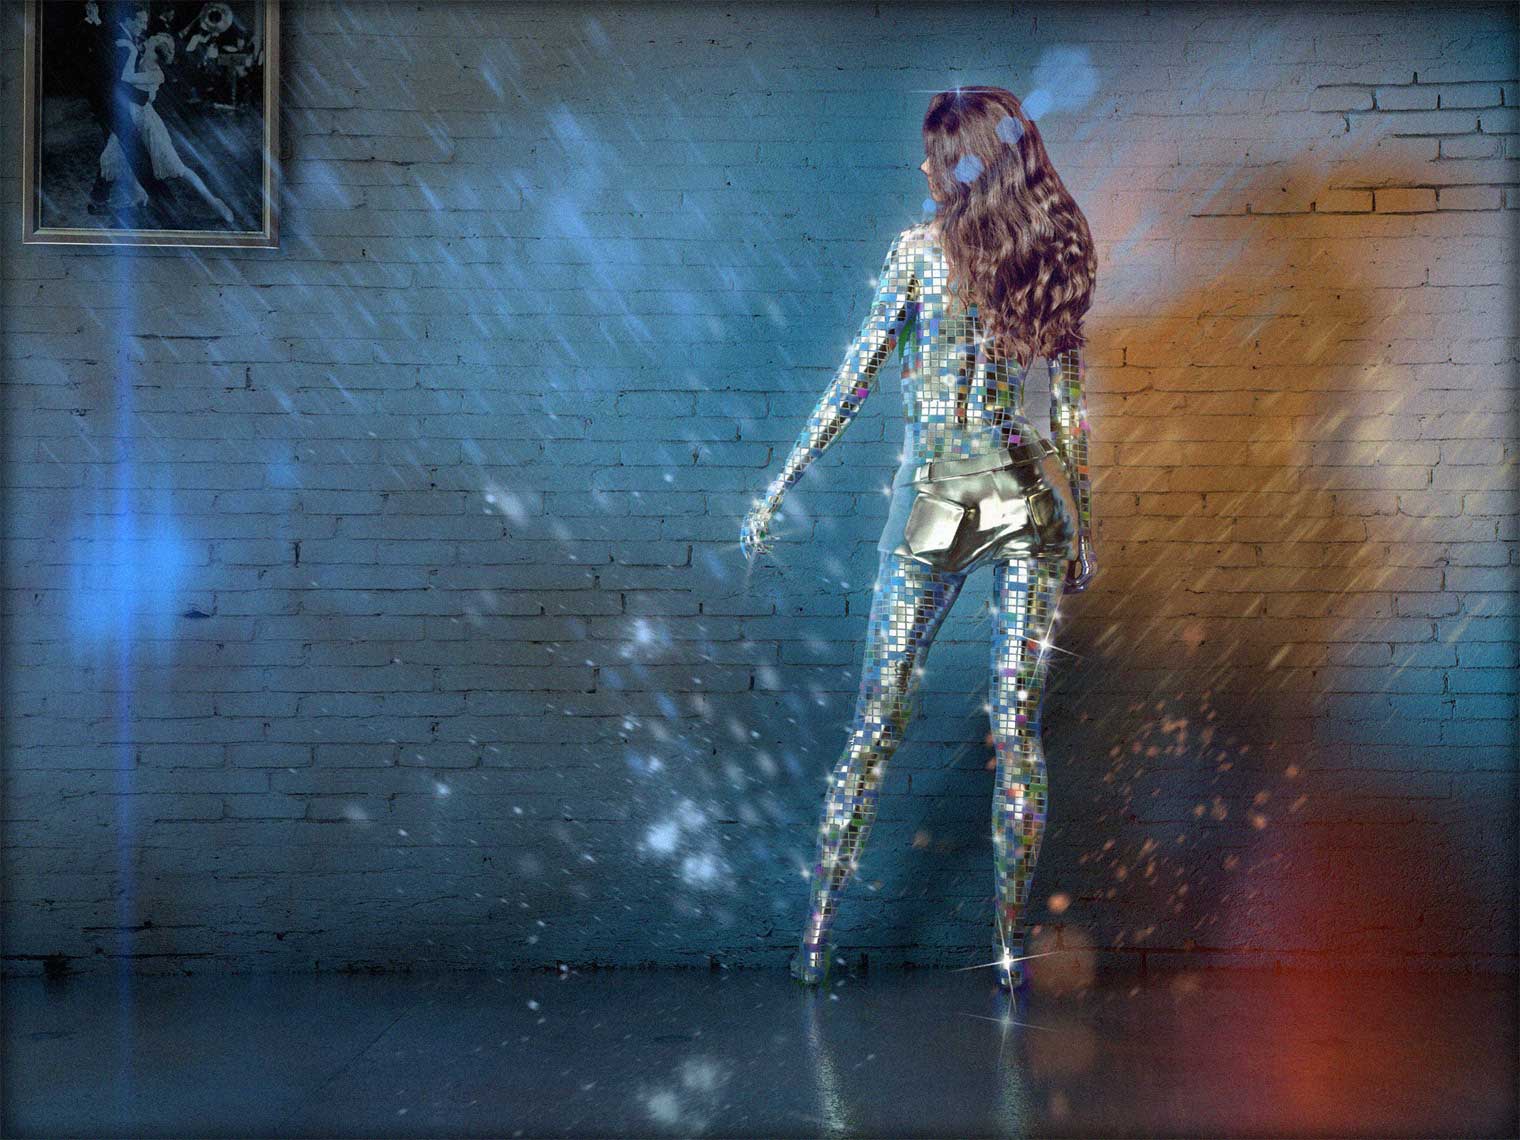 cgi_characters-cgi_people_cgi_architecture-girl-dancing-against_brickwall-covered-in-disco-ball-mirrors